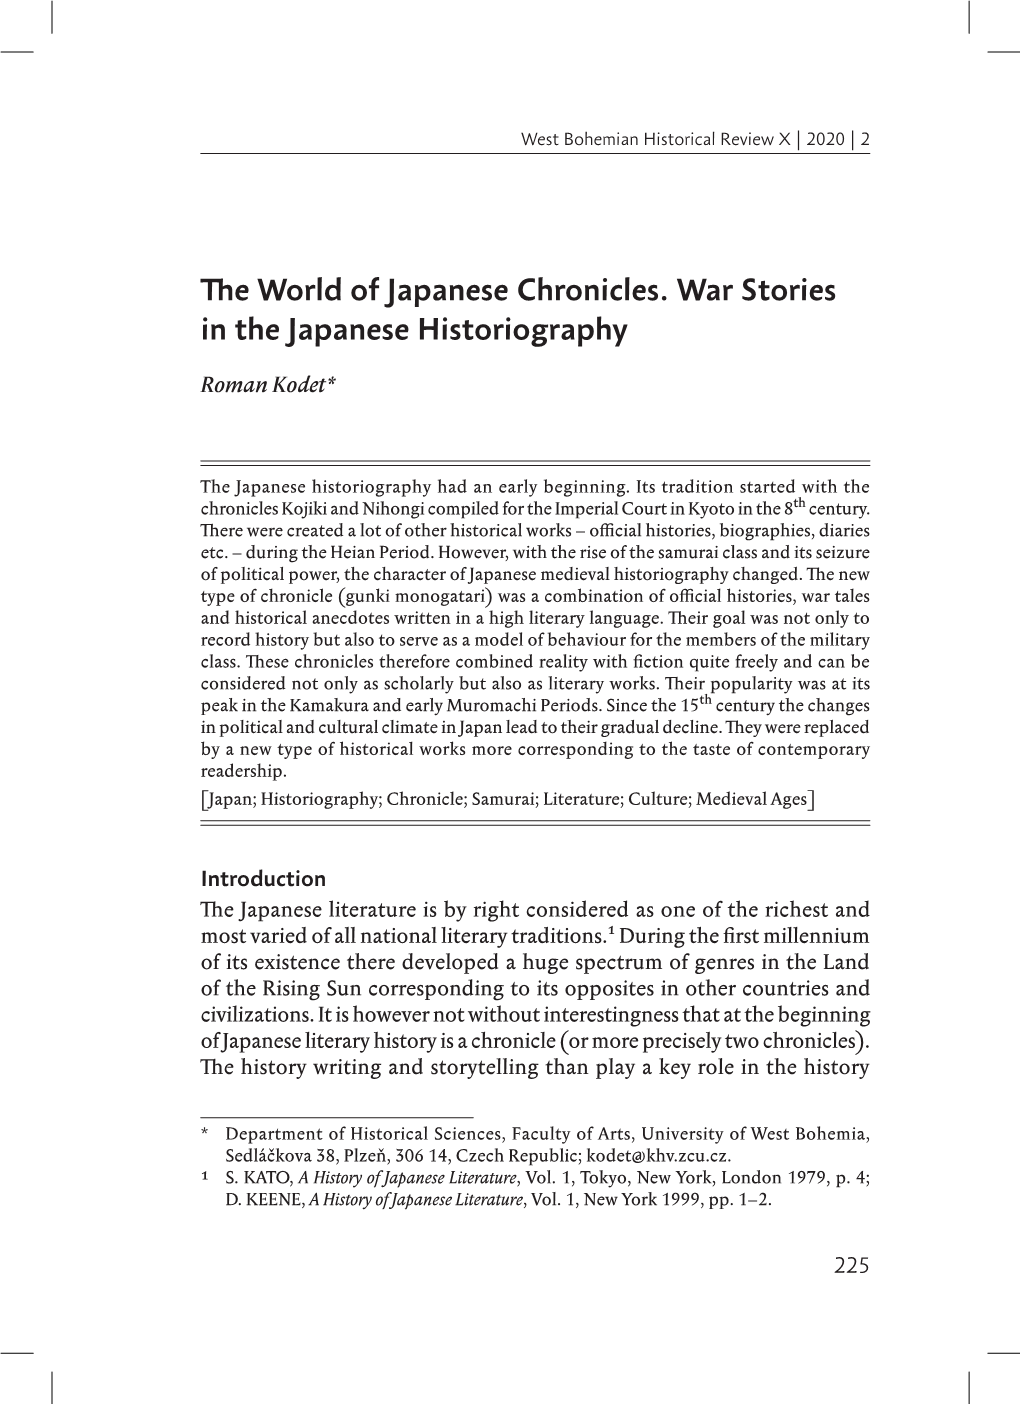 The World of Japanese Chronicles. War Stories in the Japanese Historiography